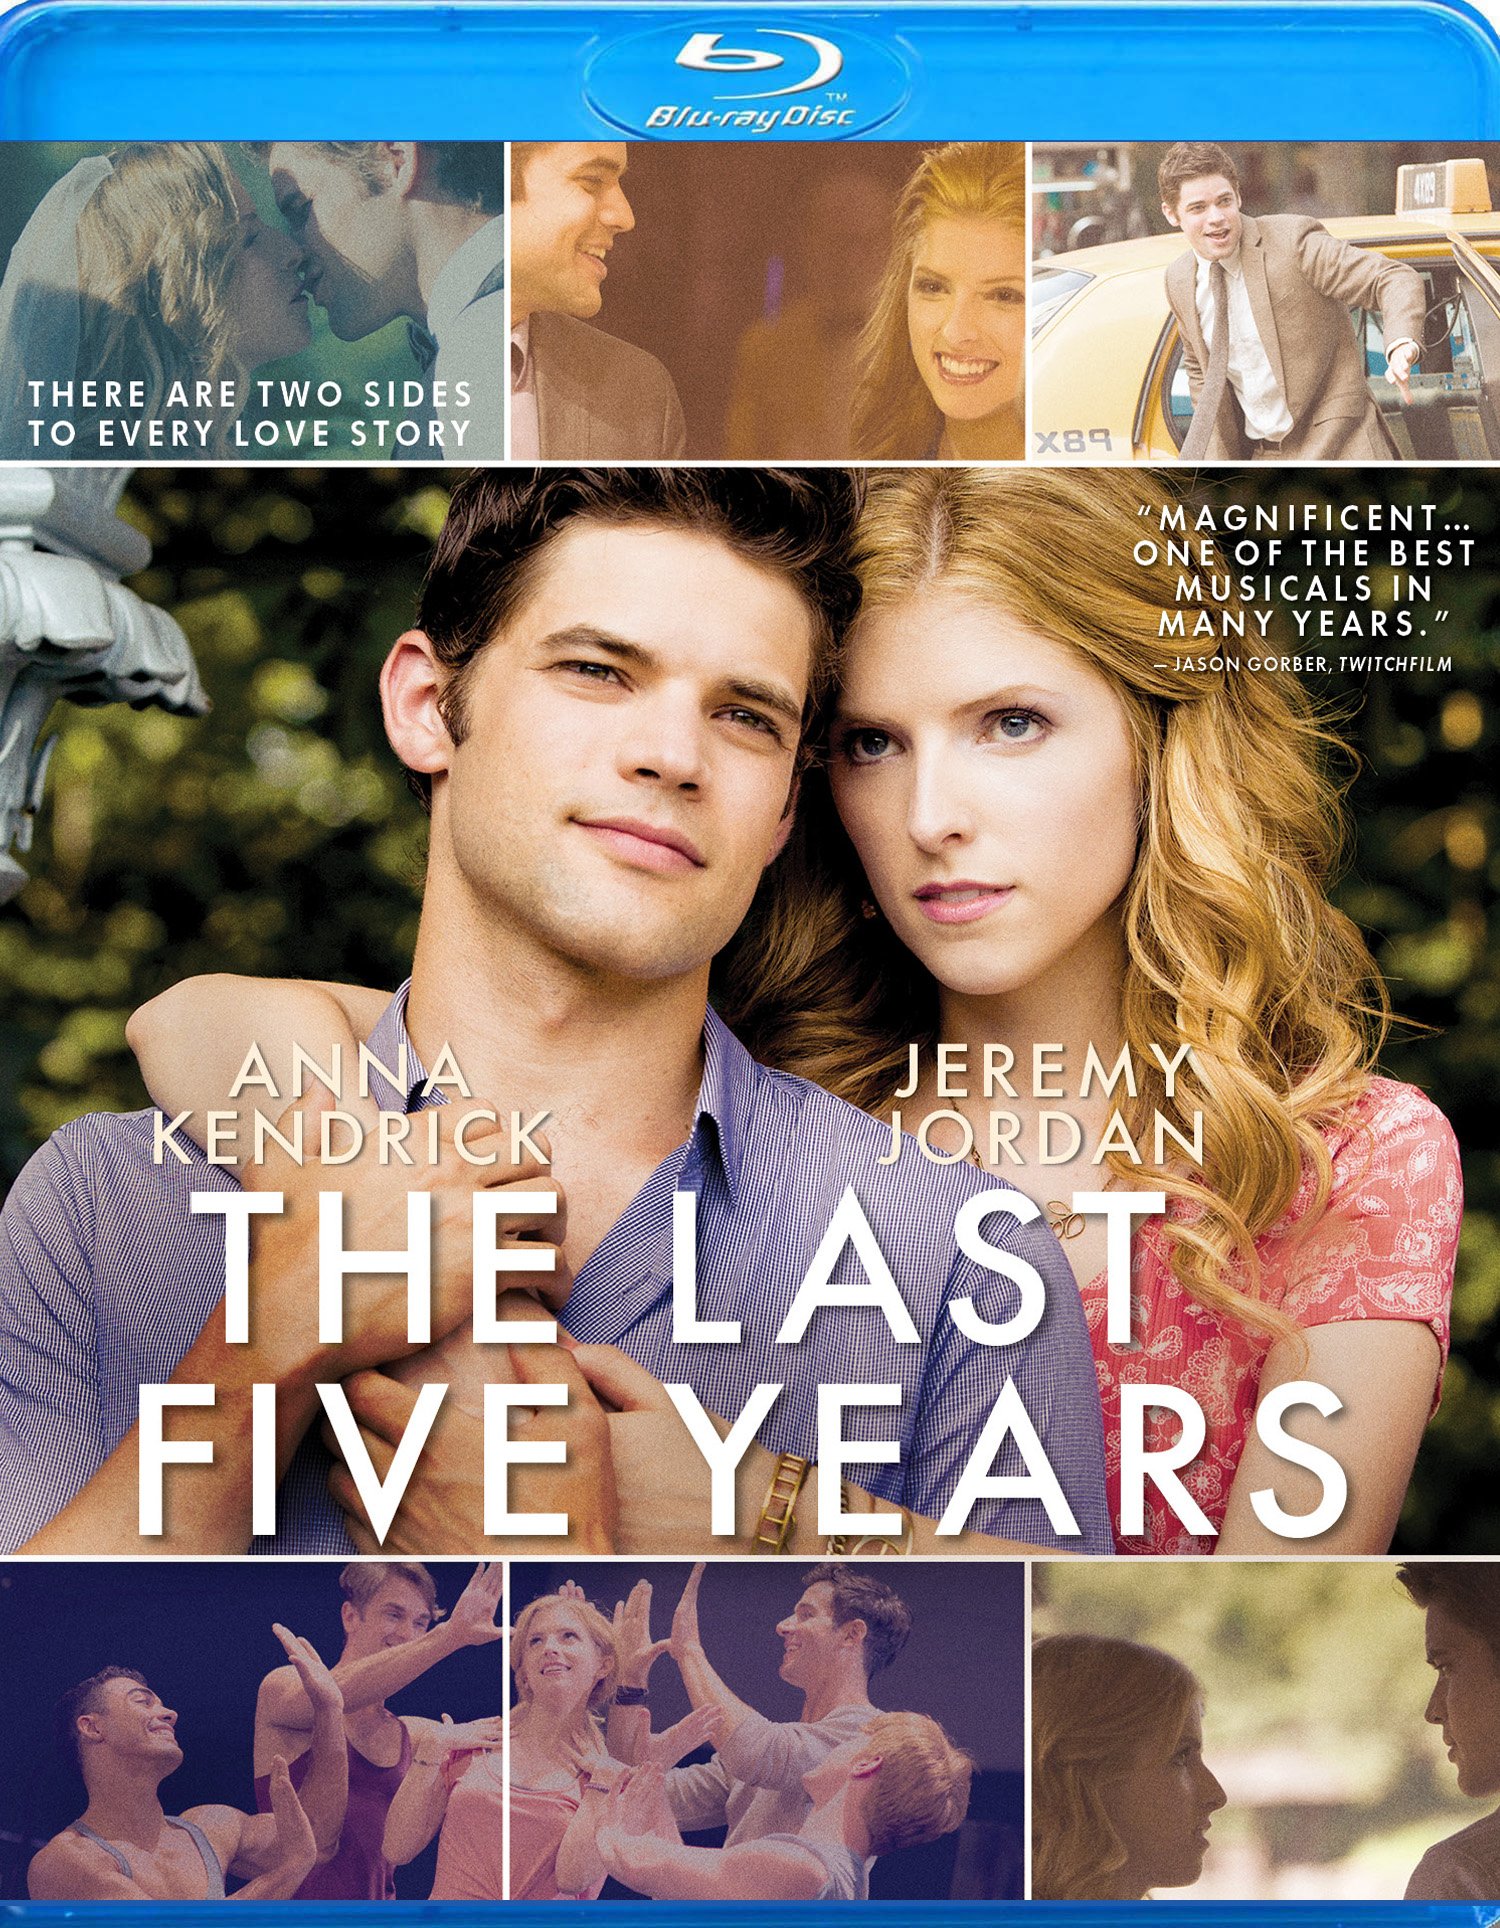 The Last 5 Years DVD Release Date May 5, 2015